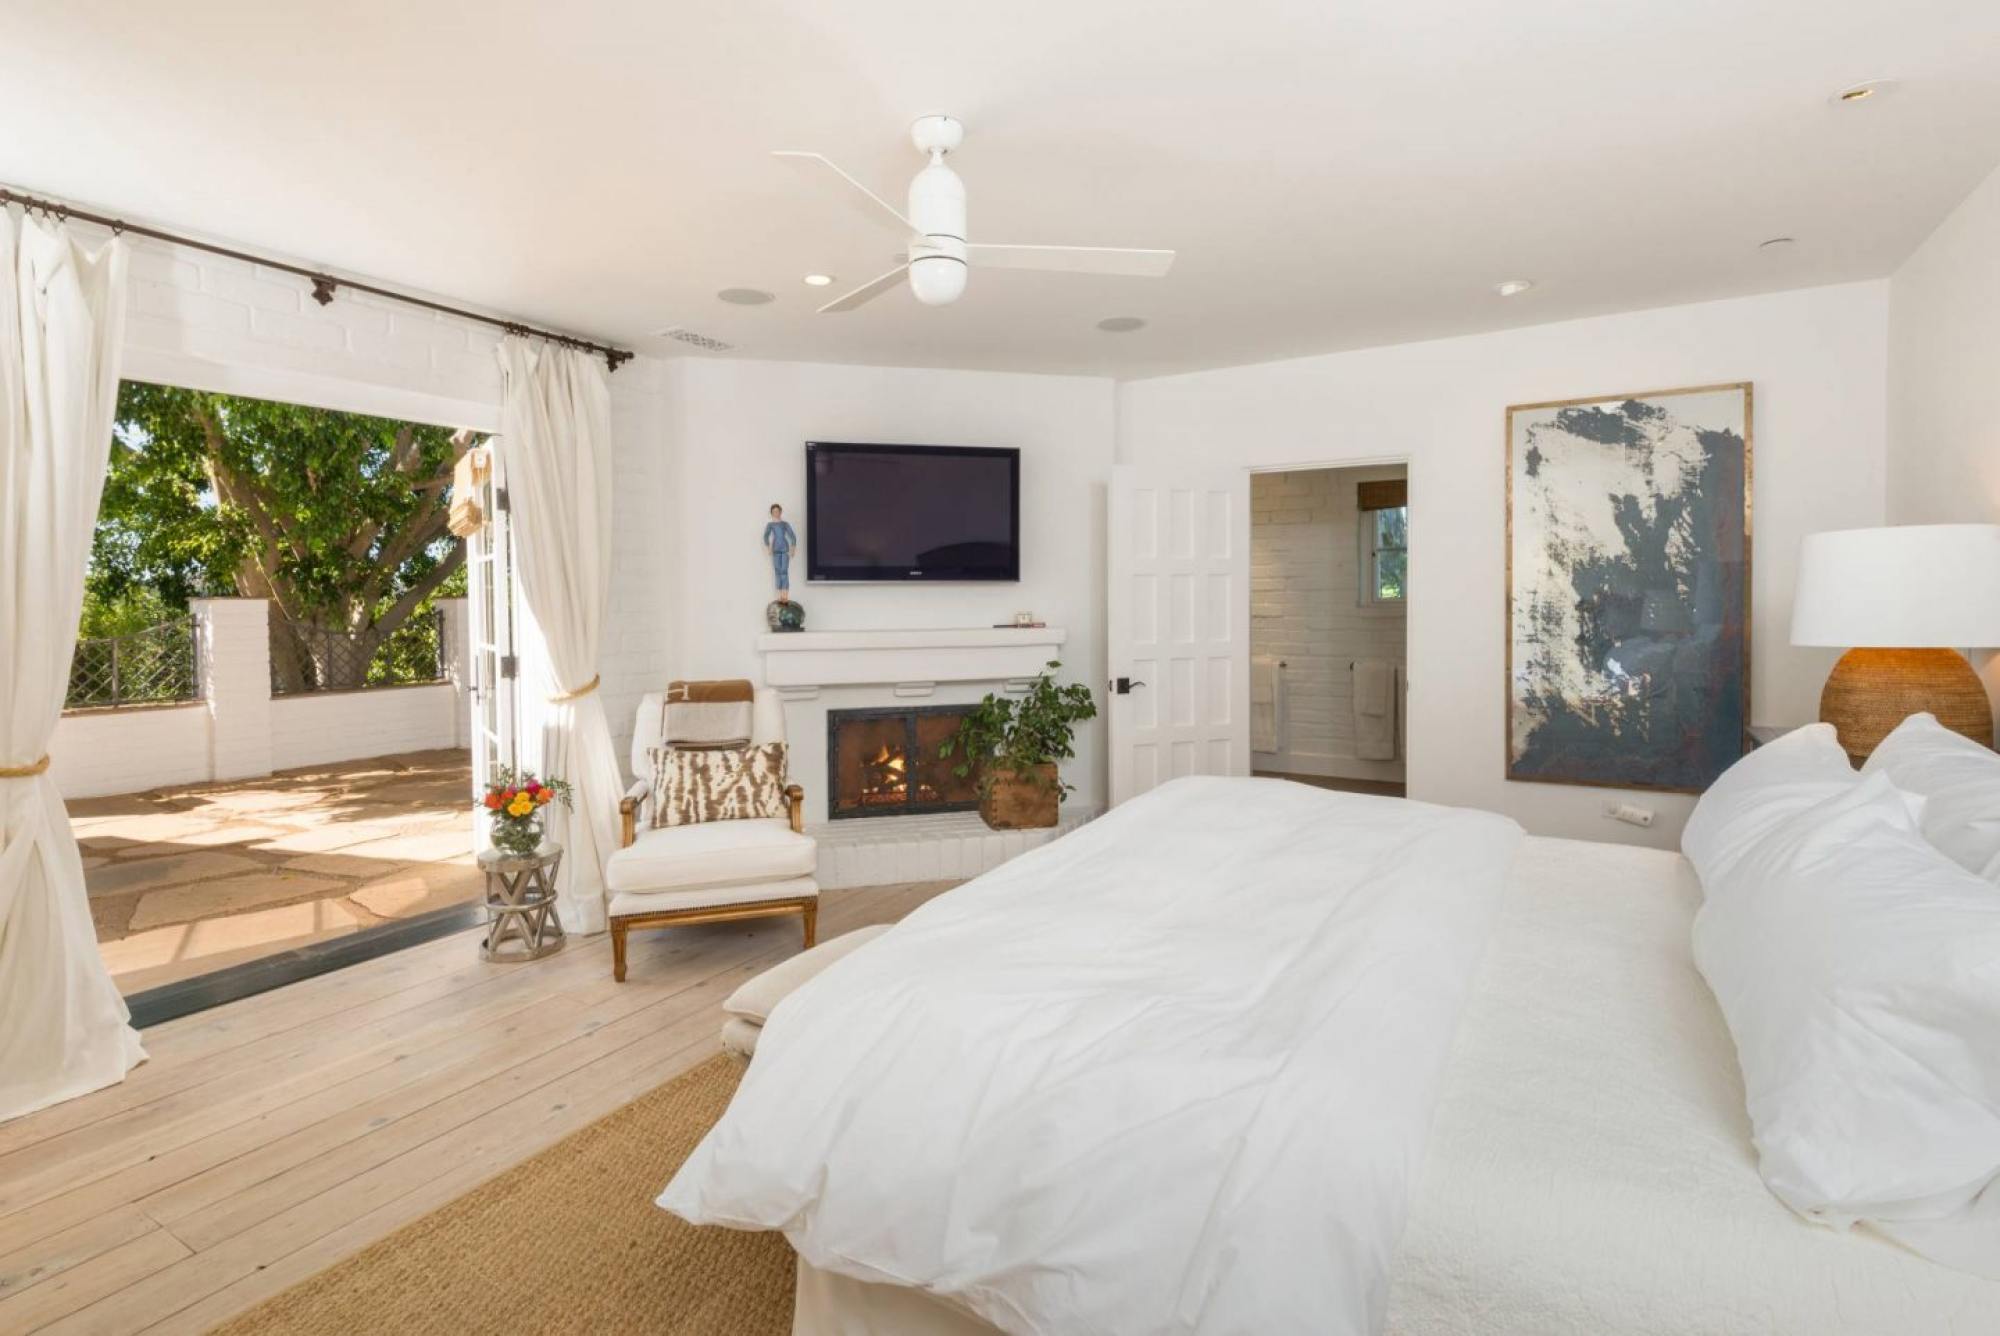 The 6,000 sq ft home has seven bedrooms: four in the main house and three in the guest house. Photo: ZenHouse Collective